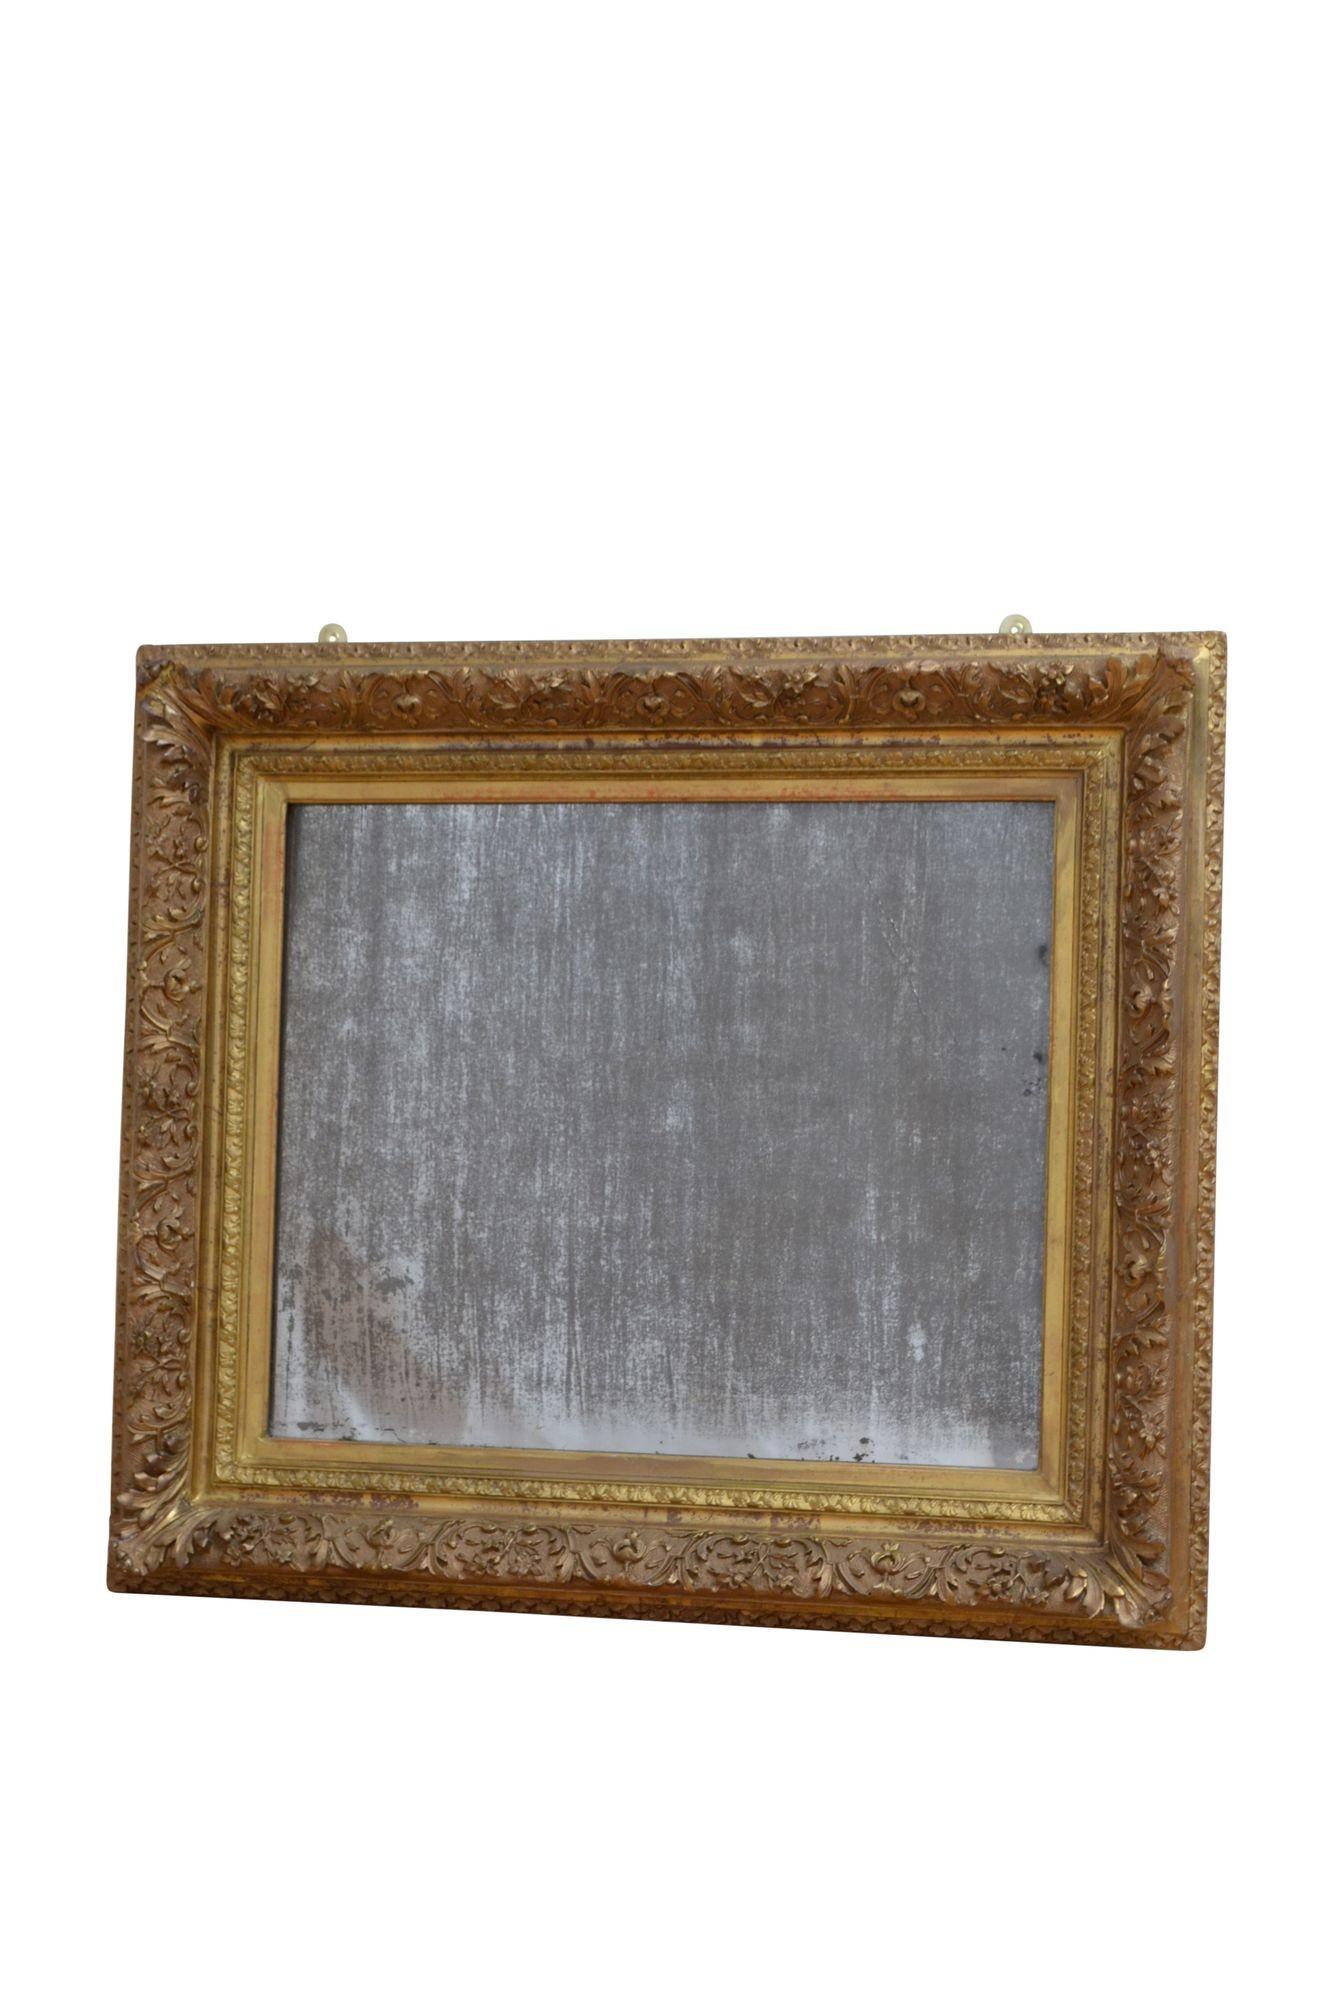 K0516 Superb 19th century giltwood wall mirror, having beautifully aged glass ( with some silvering graduation and other imperfections) in finely carved gilded frame with floral, leaf and scroll motifs. Can be positioned horizontally or vertically.